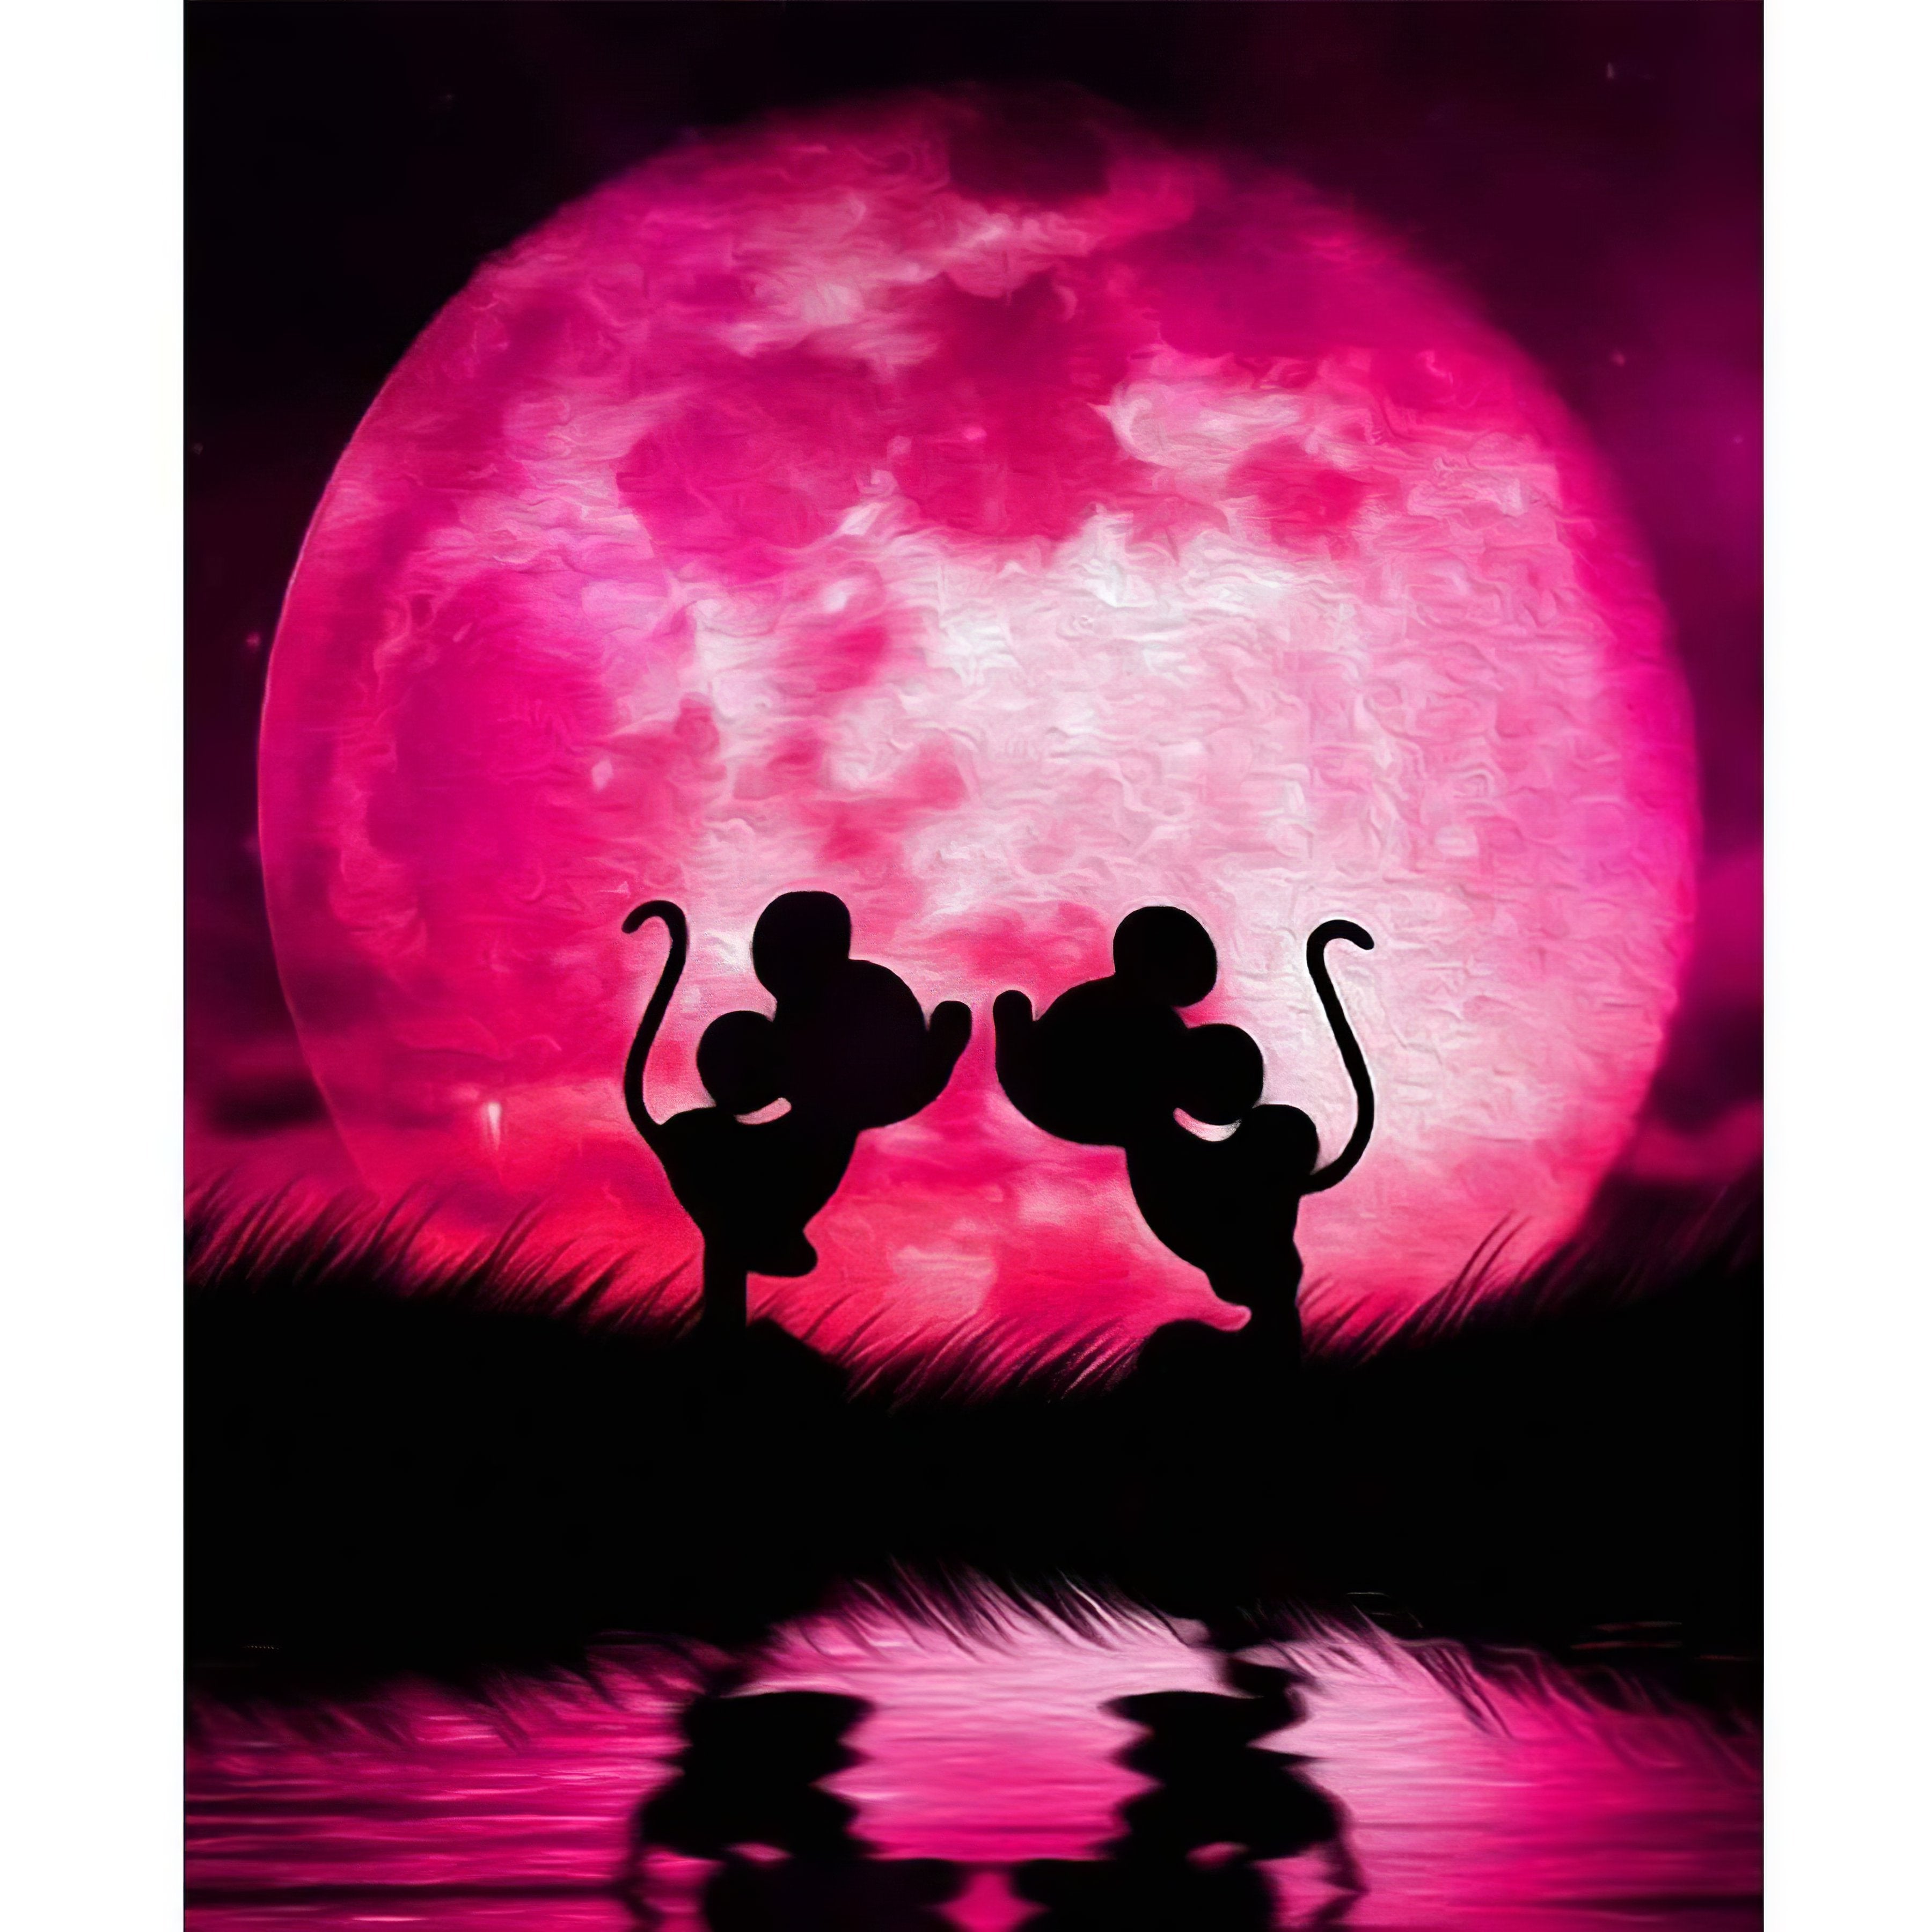 Cherish a magical moment with Mickey under a rose-lit moon.Mickey Mouse And Rose Moon - Diamondartlove